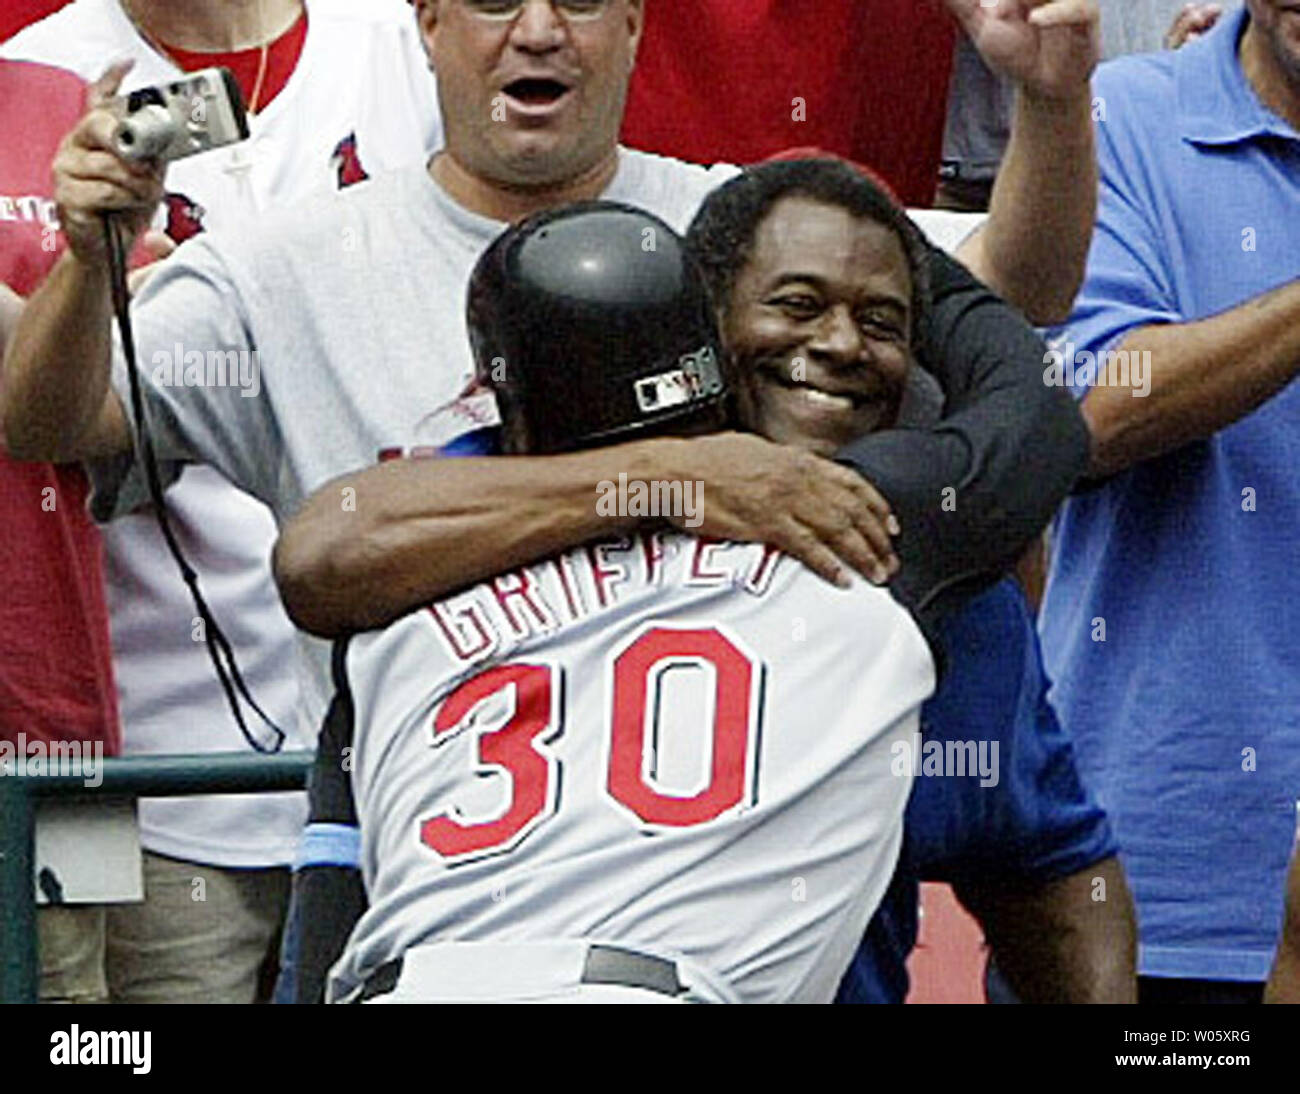 Cincinnati Reds Ken Griffey Jr. gets a hug from his father Ken Griffey Sr.  after the younger Griffey smacked his 500th career home run in the sixth  inning, against the St. Louis